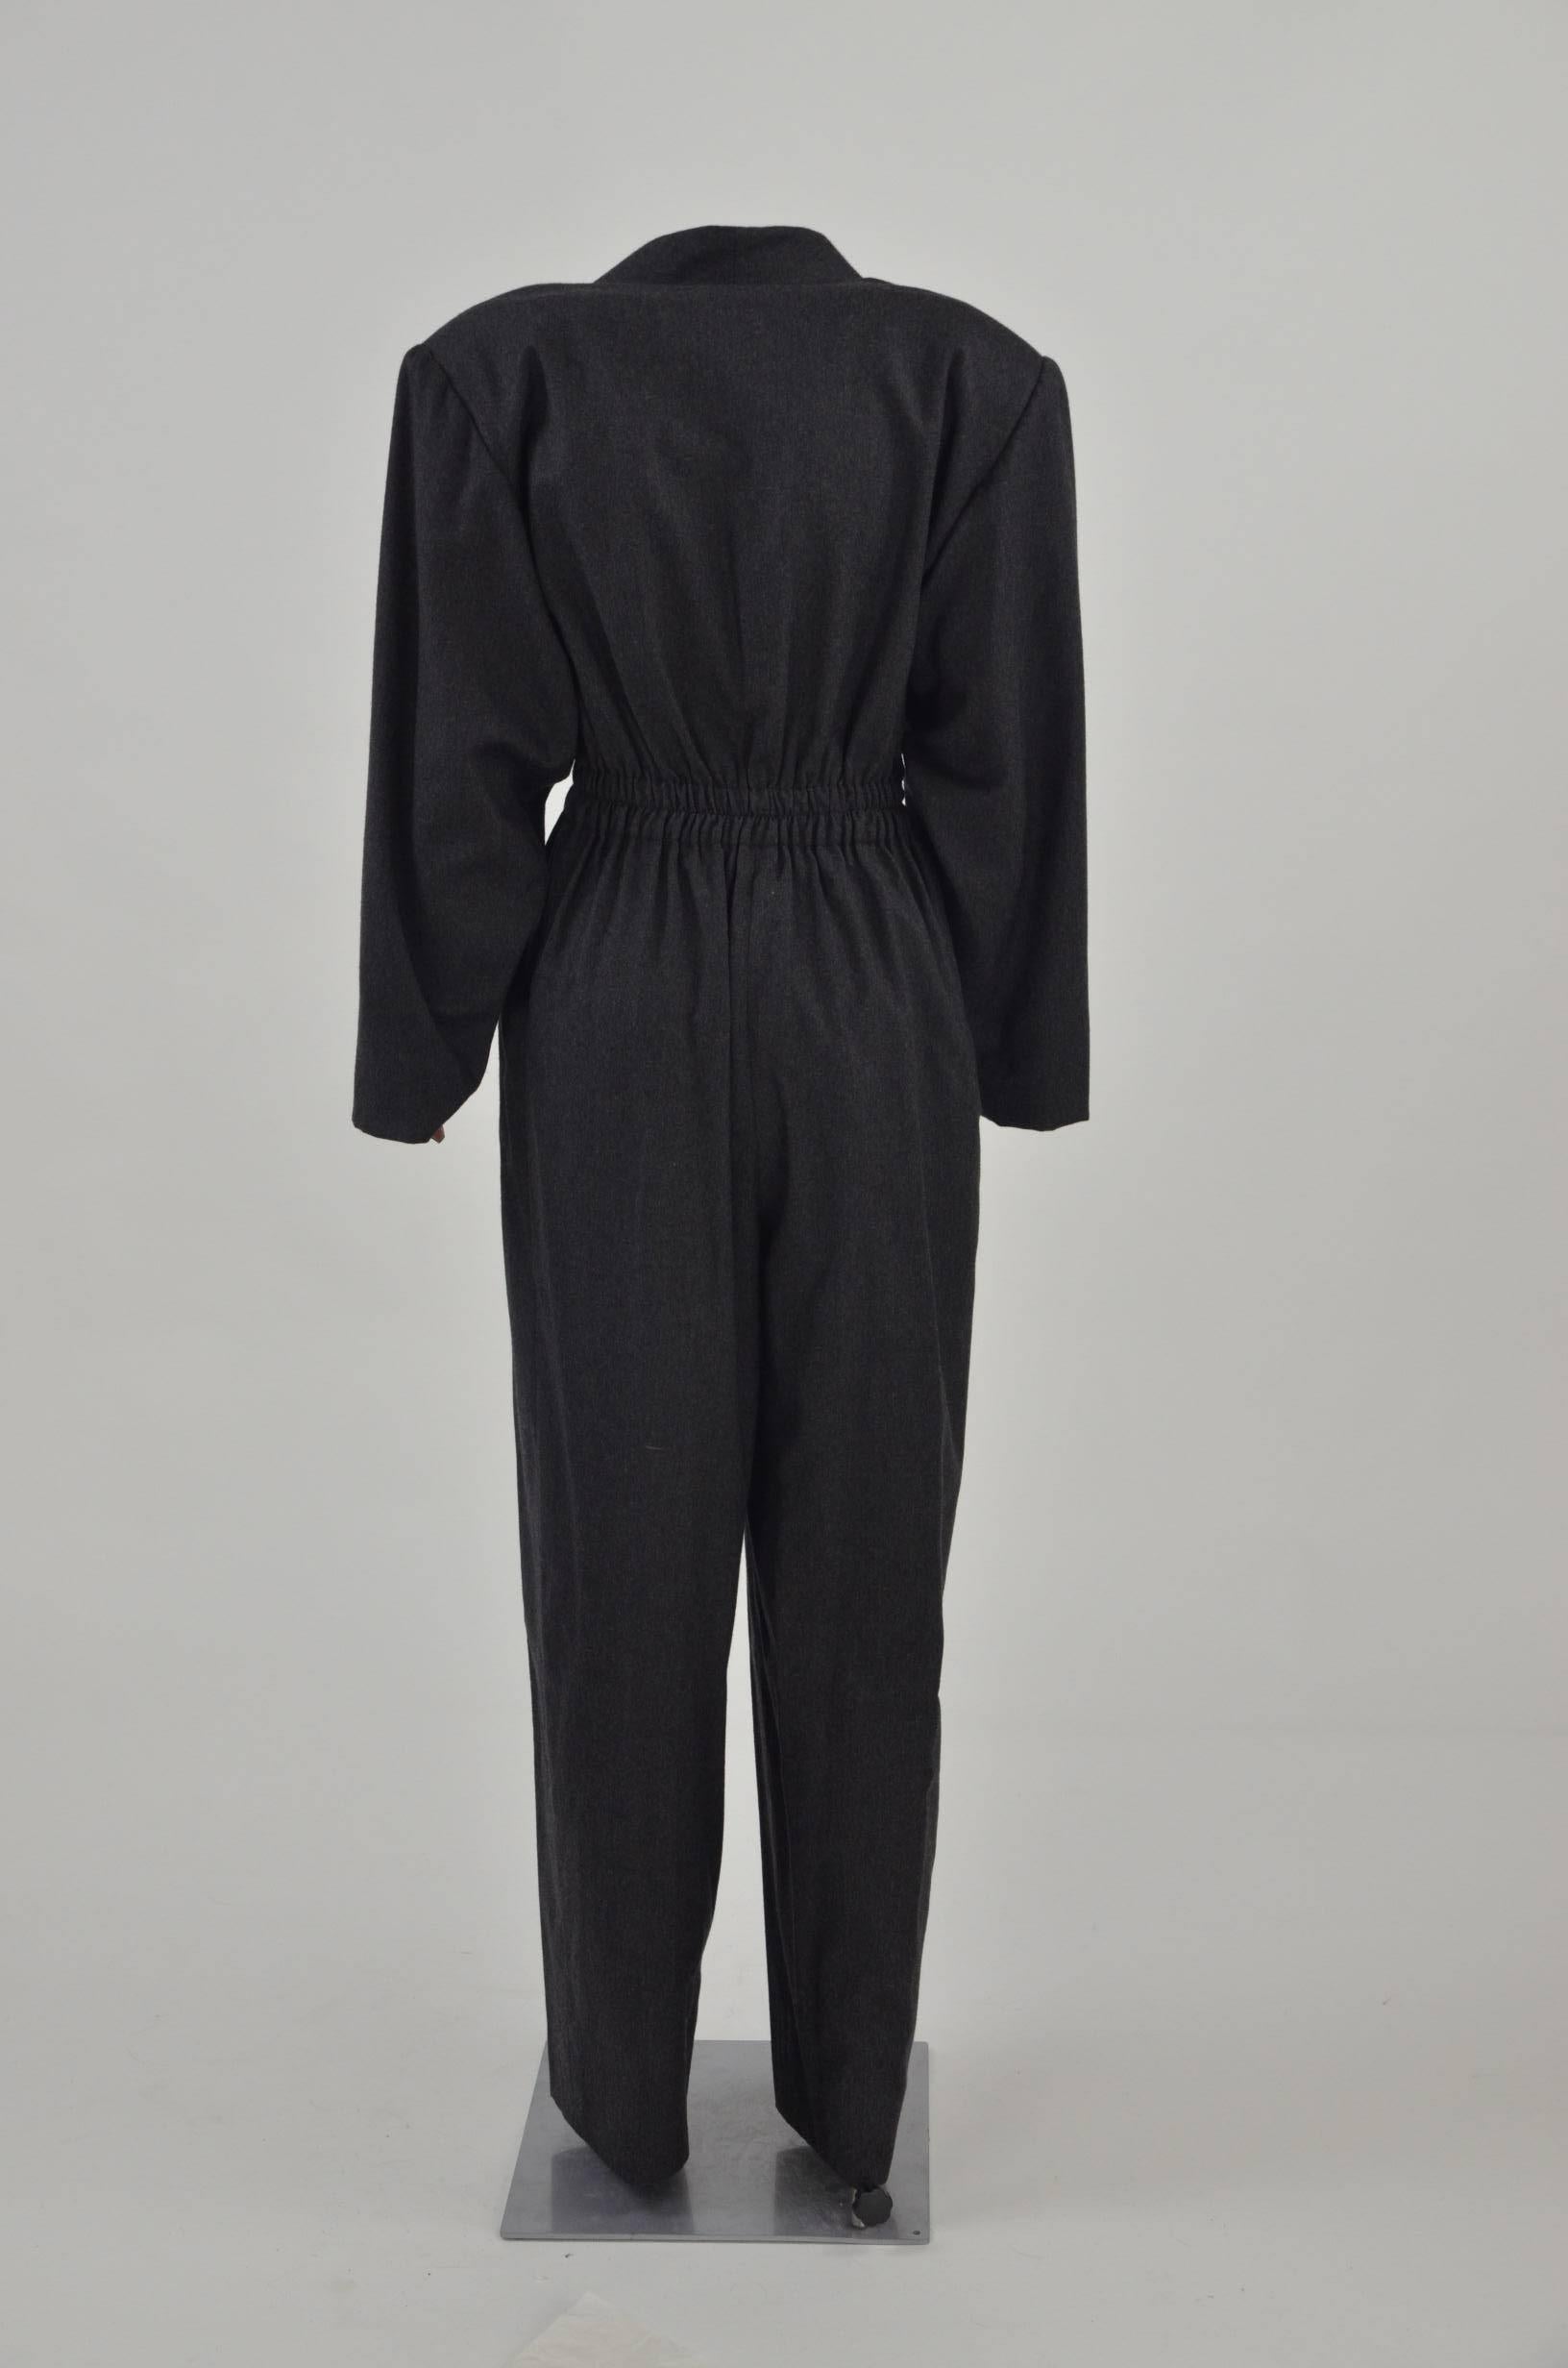 Grey wool and cashmere jumpsuit from Hermès with a wrap style front, a belted waist, long sleeves, a loose fit, a wide leg and side pockets. The jumpsuit is from the 80s.

Please note that this item has some minor defects, as the pictures show.